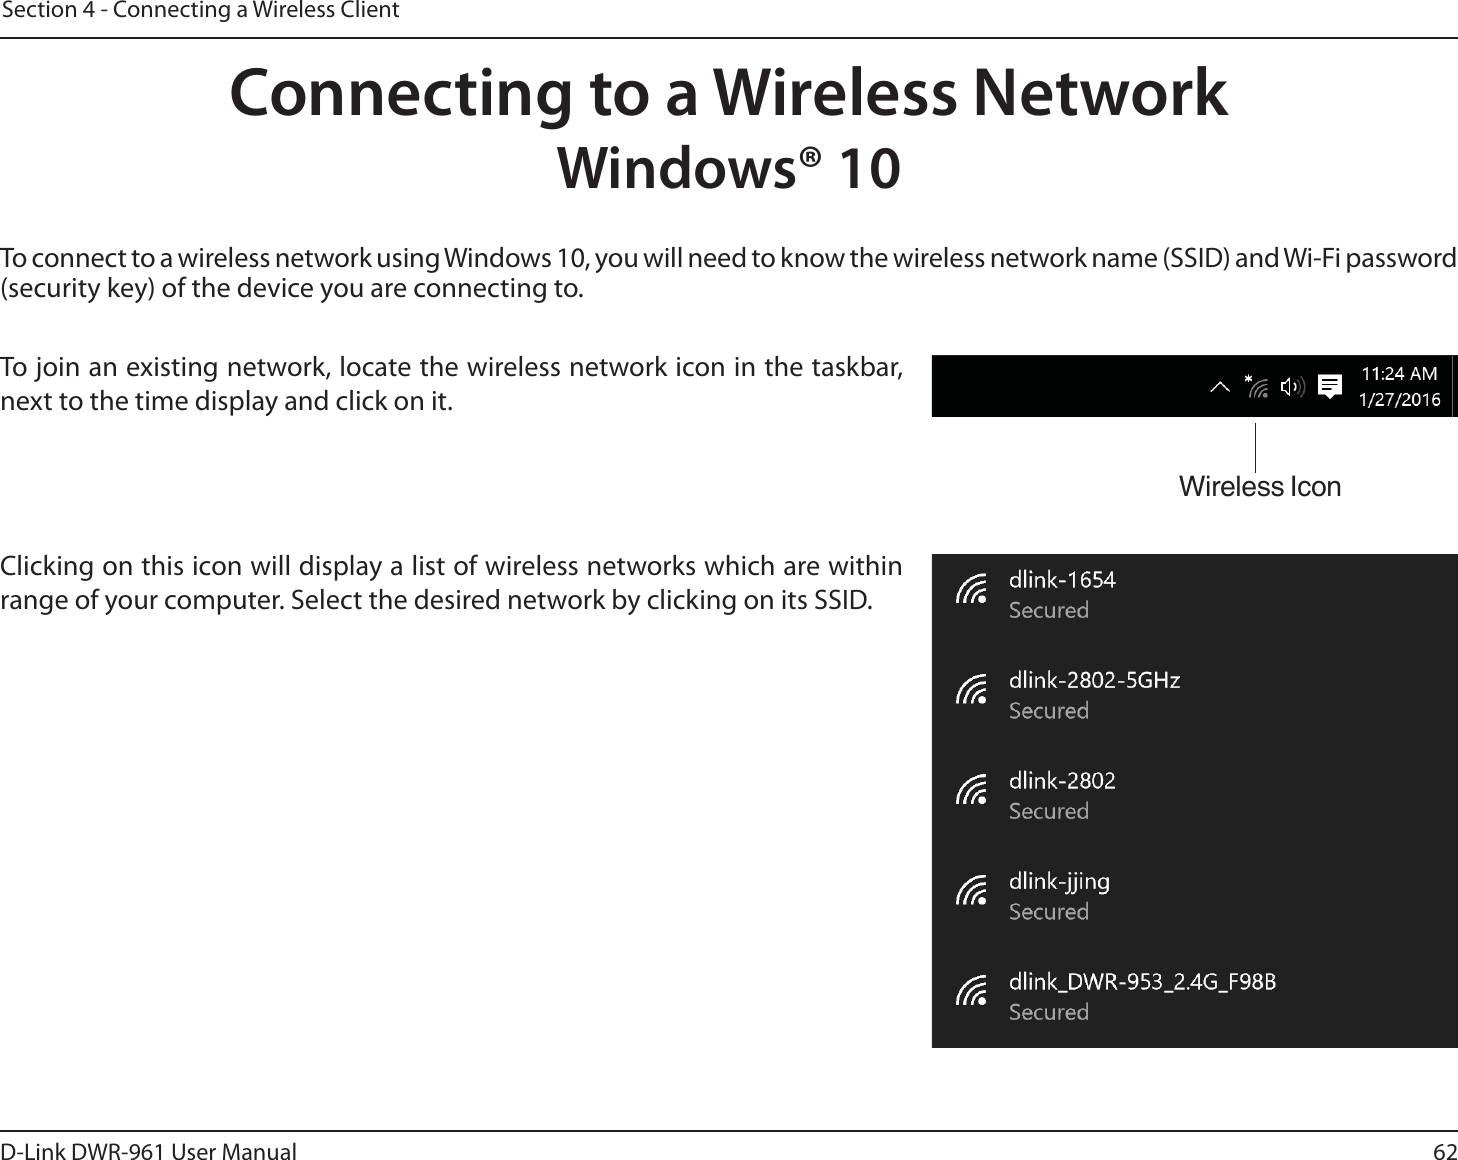 62D-Link DWR-9 User ManualSection 4 - Connecting a Wireless ClientTo connect to a wireless network using Windows 10, you will need to know the wireless network name (SSID) and Wi-Fi password (security key) of the device you are connecting to. To join an existing network, locate the wireless network icon in the taskbar, next to the time display and click on it. Wireless IconClicking on this icon will display a list of wireless networks which are within range of your computer. Select the desired network by clicking on its SSID.Connecting to a Wireless NetworkWindows® 10